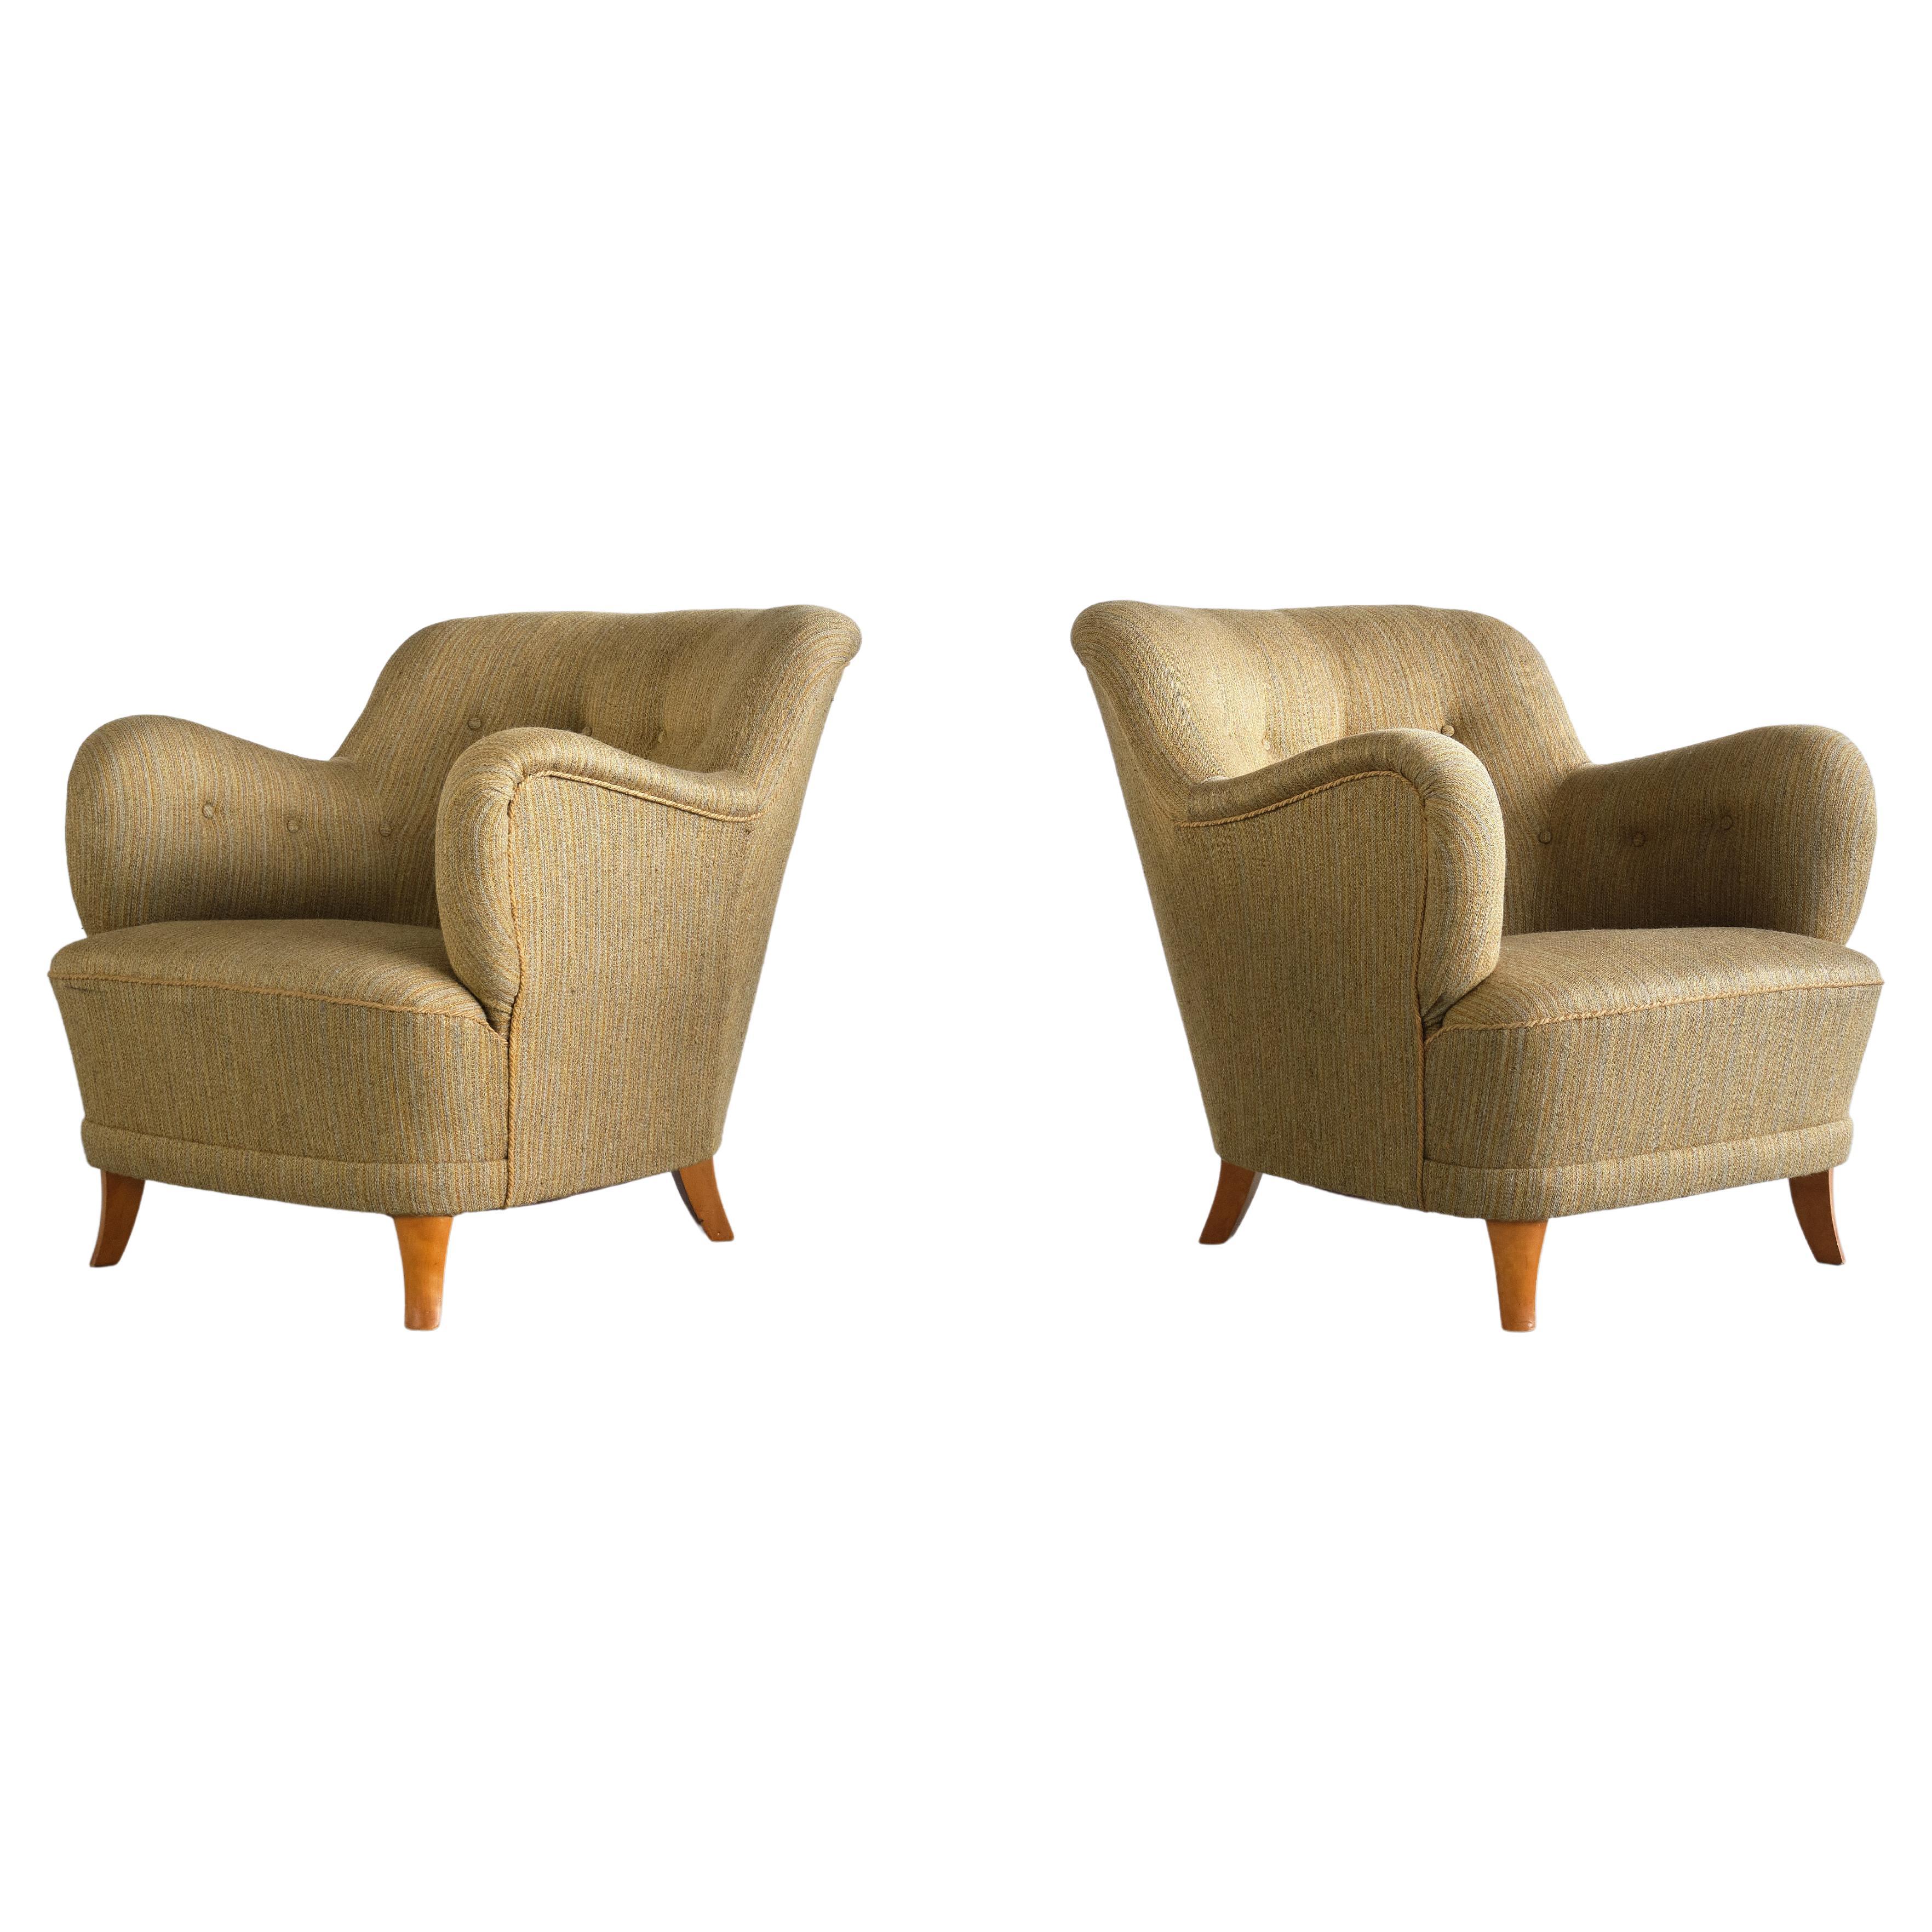 Sculptural Pair of Gustav Axel Berg Armchairs in Beech and Wool, Sweden, 1940s For Sale